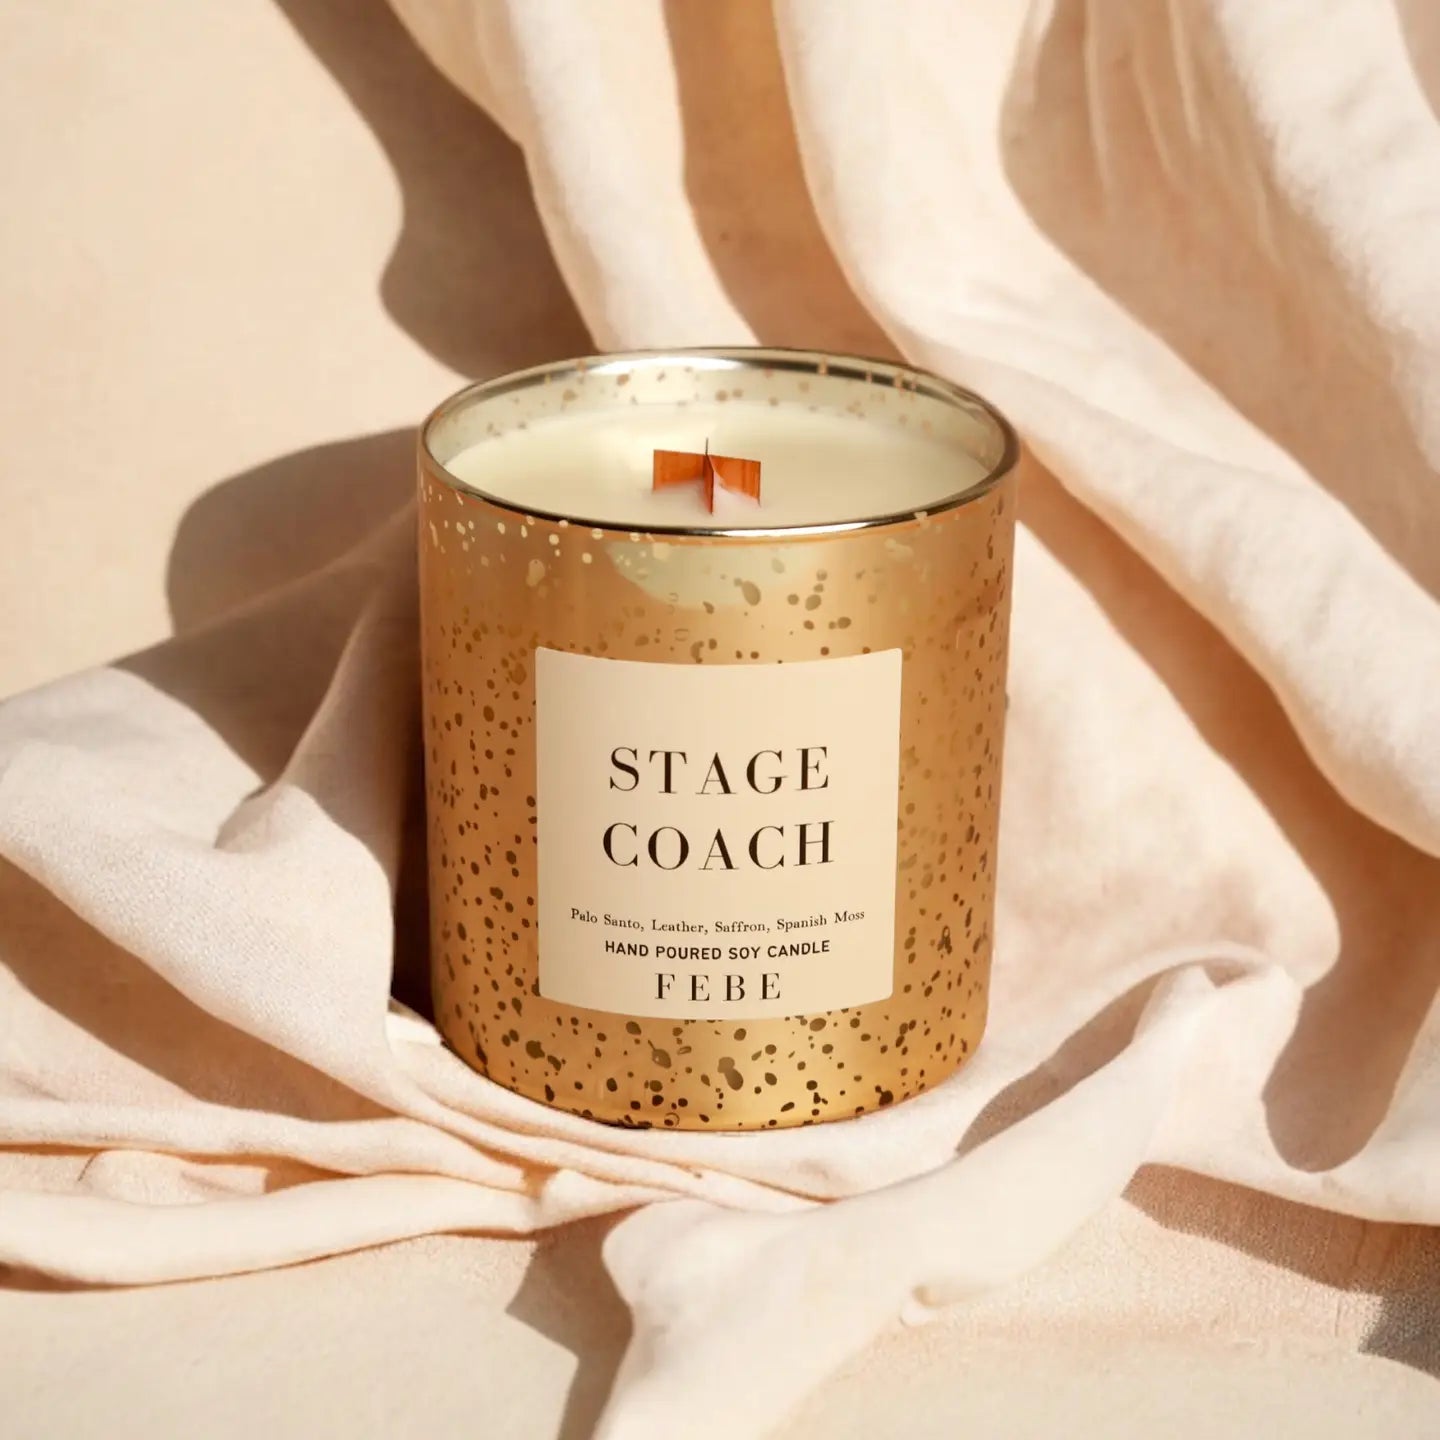 A scented candle labeled &quot;FEBE candle by Faire&quot; in a speckled gold container with a wooden wick, set against a soft beige Bungalow-style fabric background.